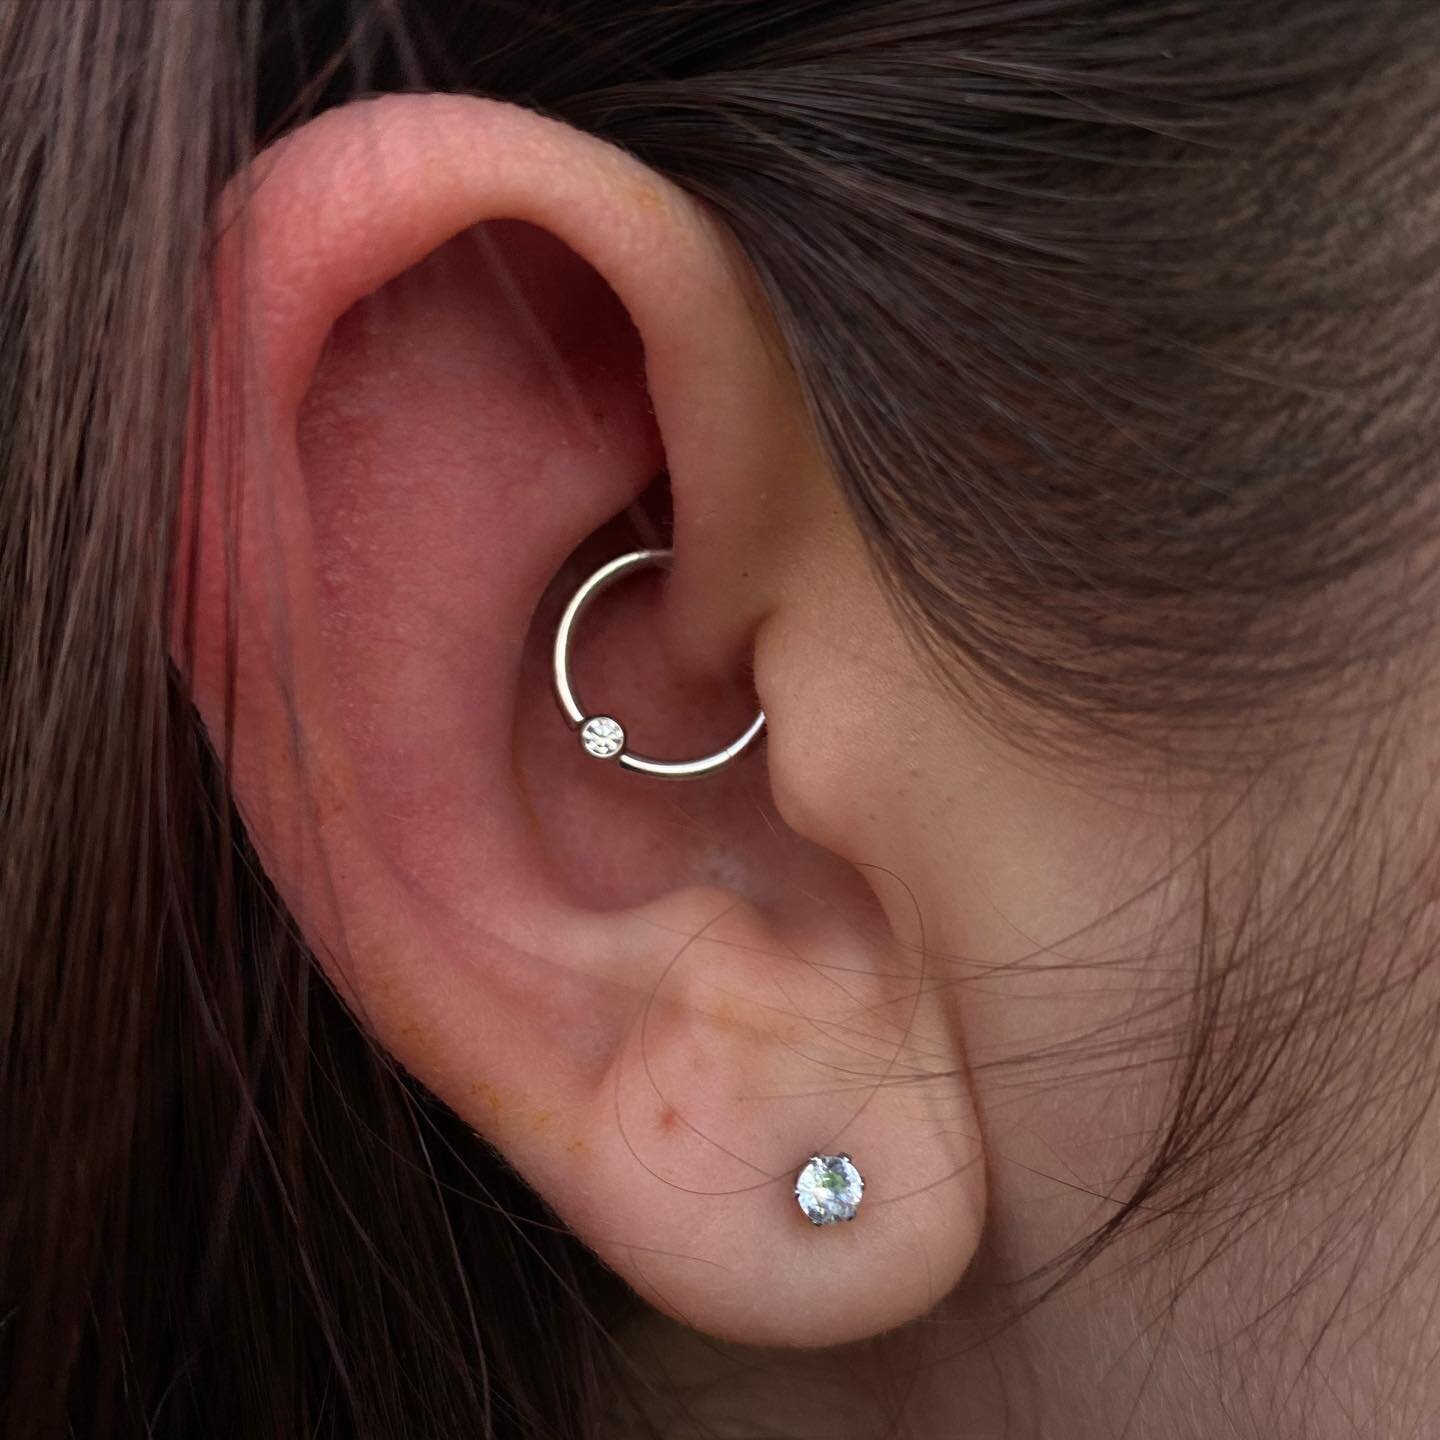 ✨Fresh daith piercing from awhile ago✨ I&rsquo;ll be out of the studio (again, sorry!!!) next week. DM me so I can fit you in before I&rsquo;m Yeehawin in Tennessee. 🤠